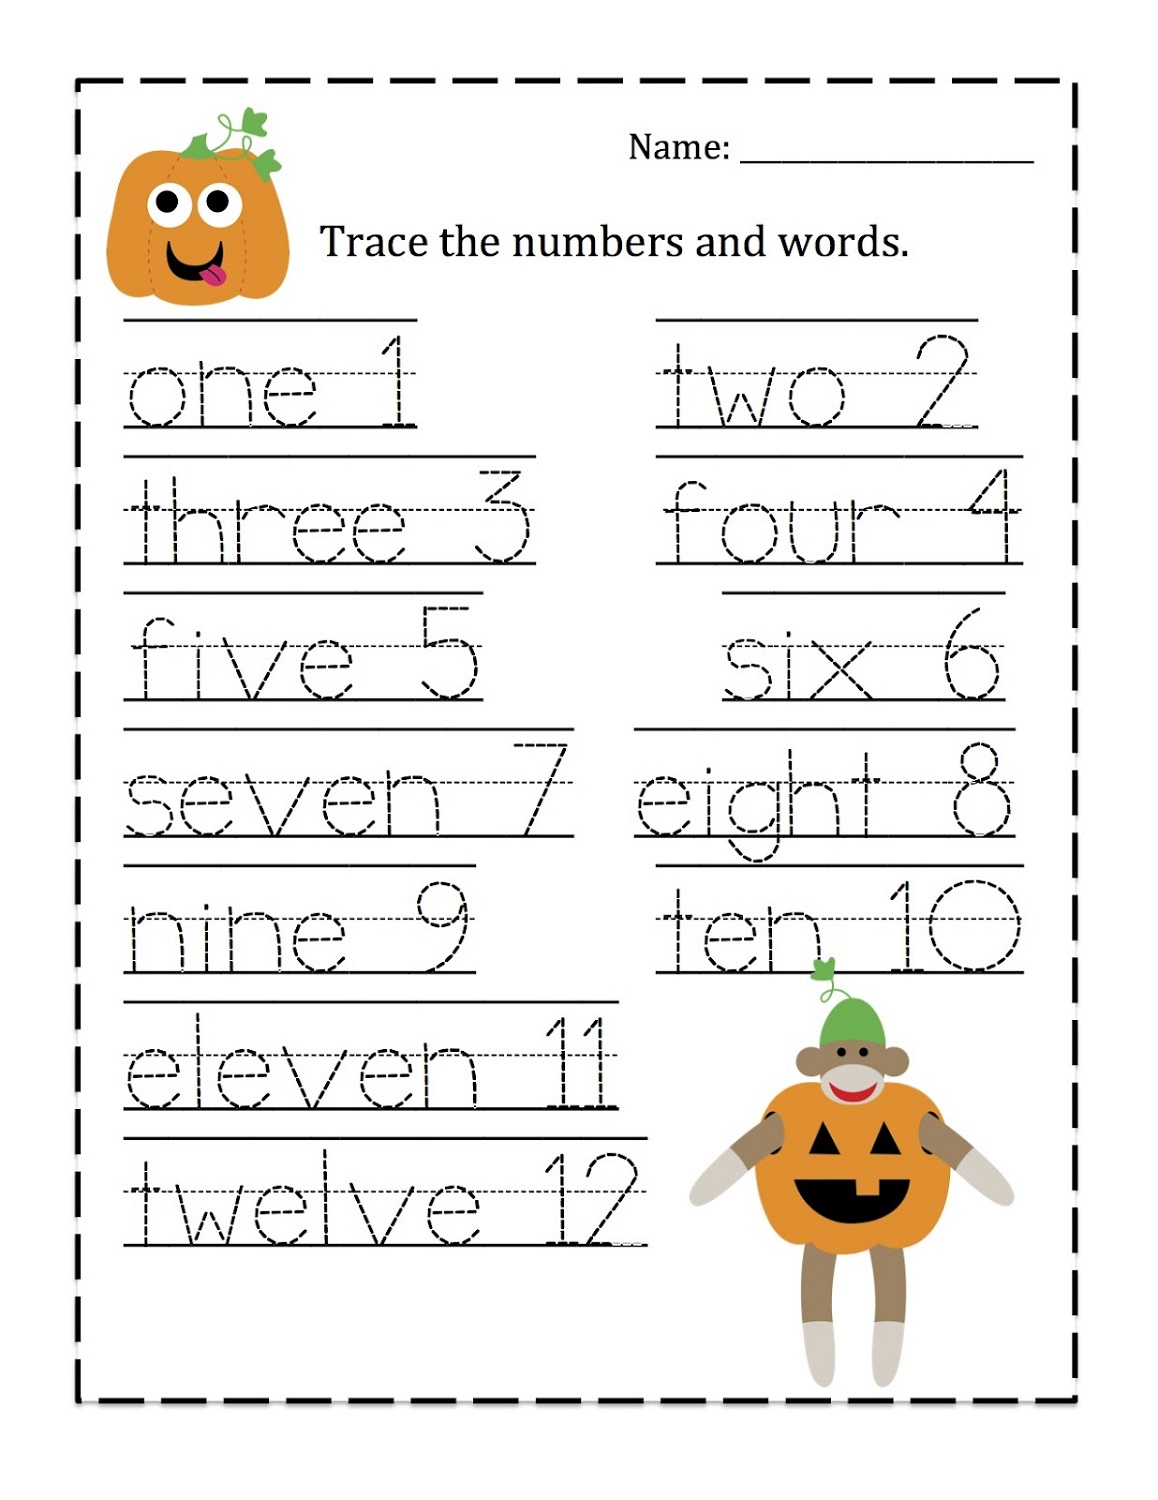 numbers-1-5-traceable-learning-printable-trace-number-1-20-worksheets